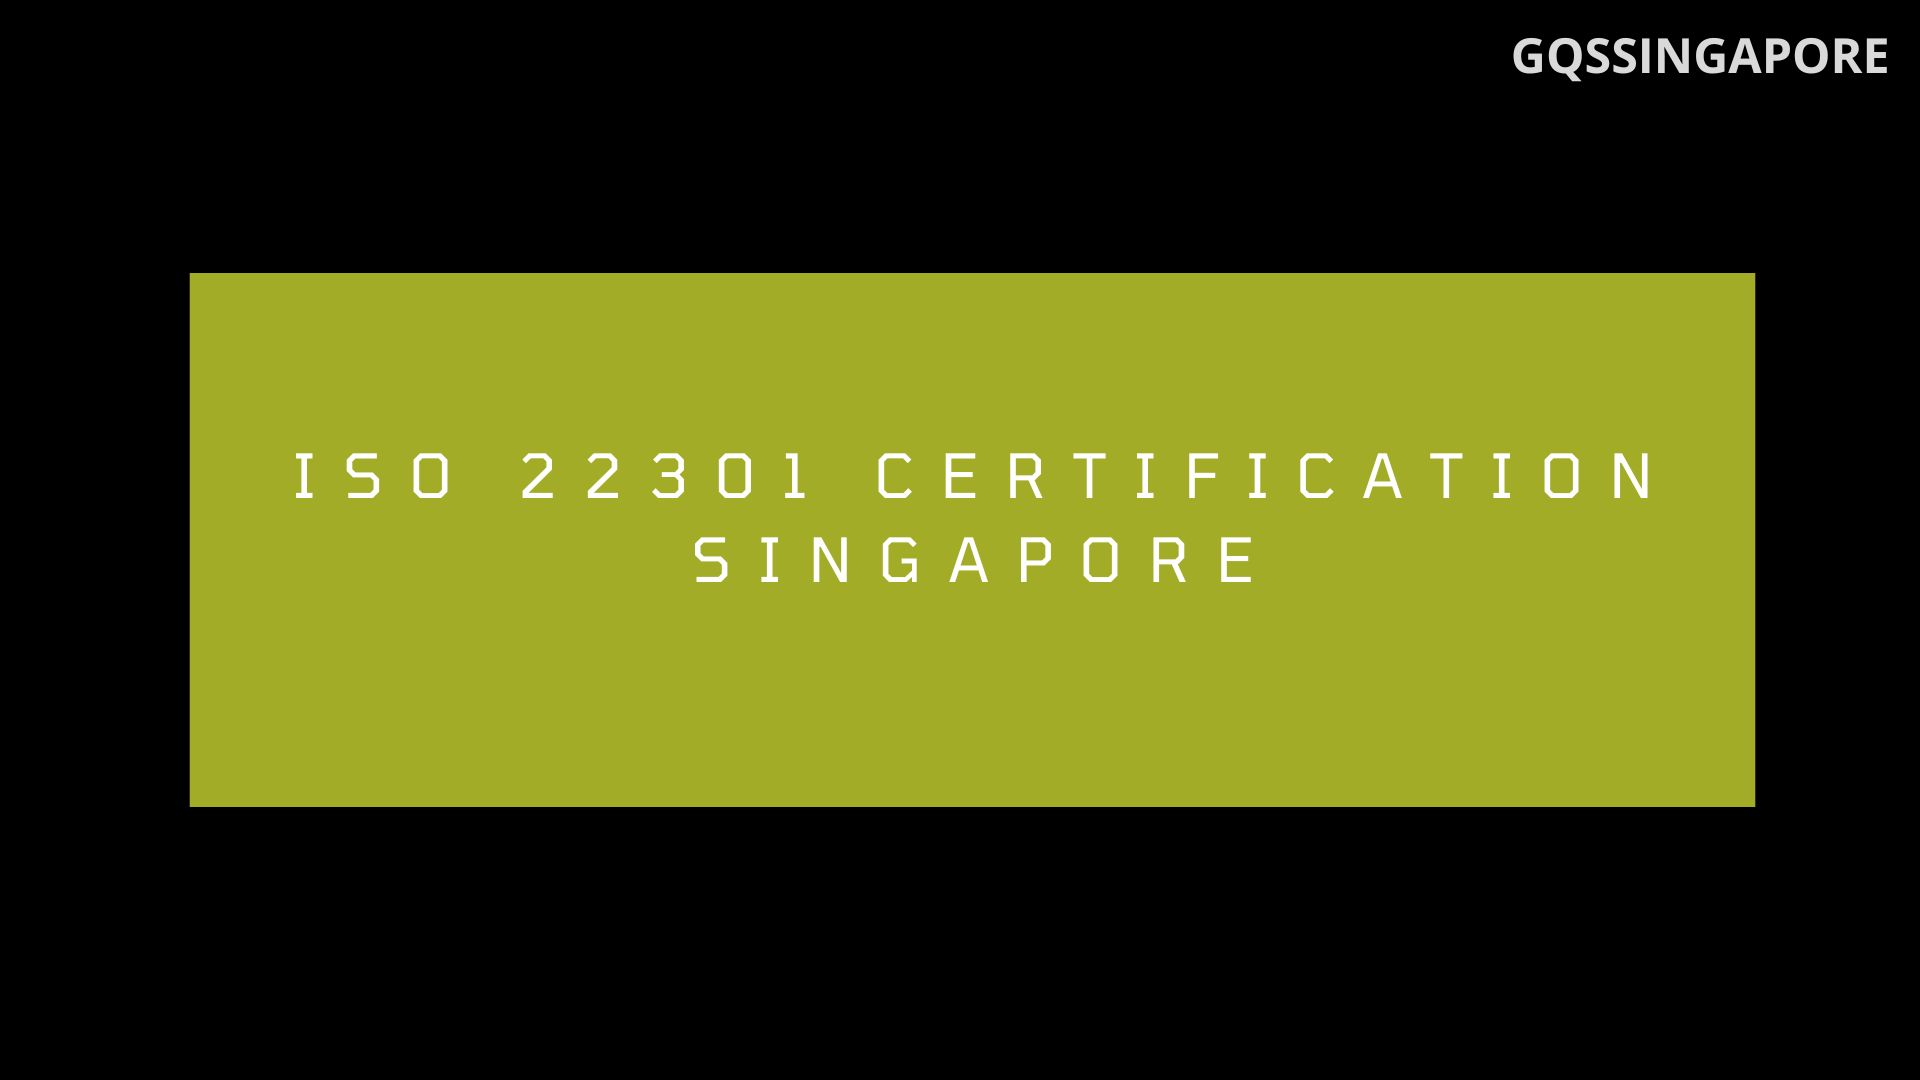 ISO 22301 CERTIFICATION SINGAPORE